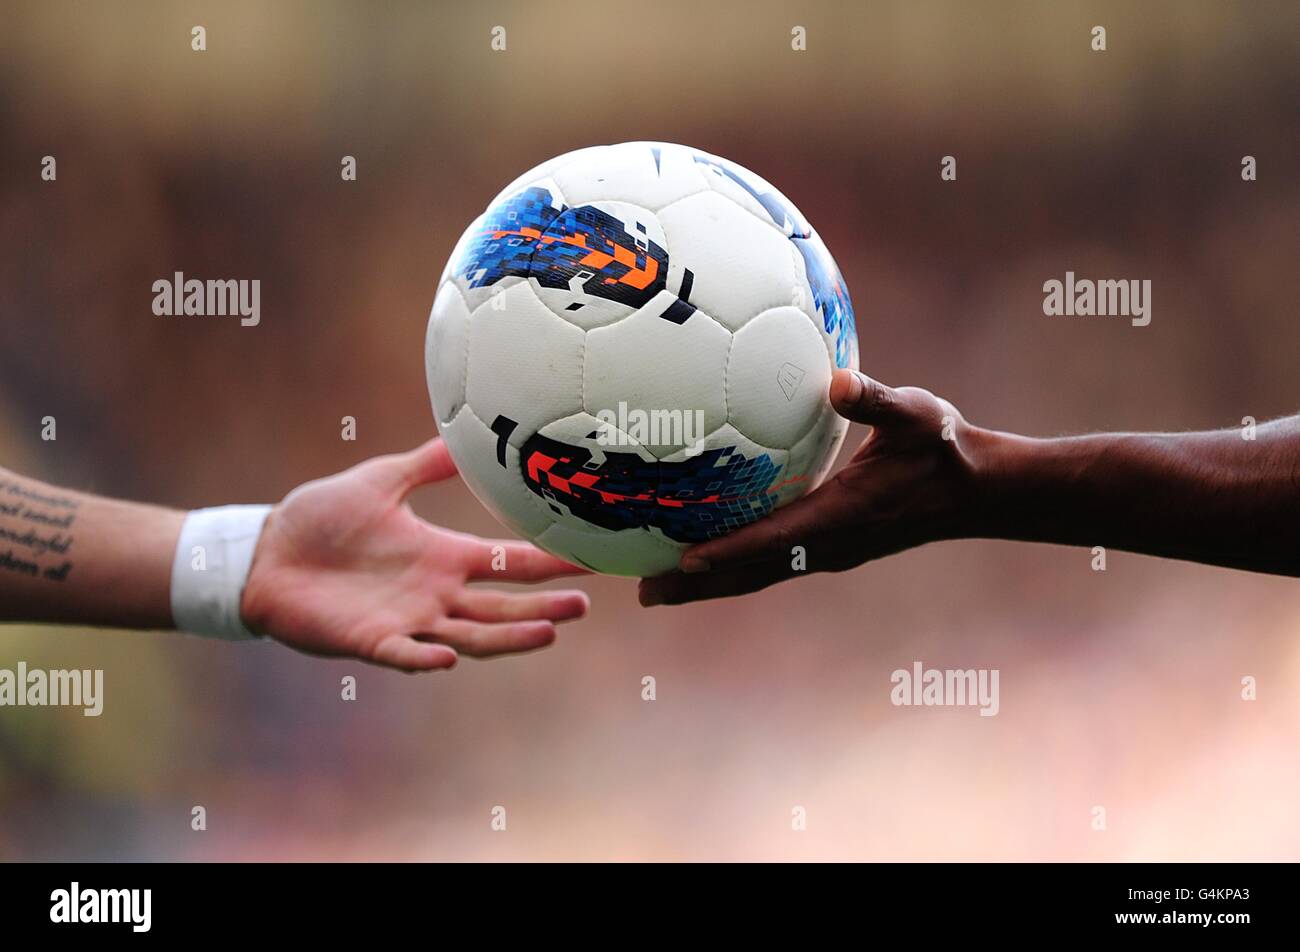 A generic view of a player holding the match-ball out to give it to another player from the opposing team Stock Photo